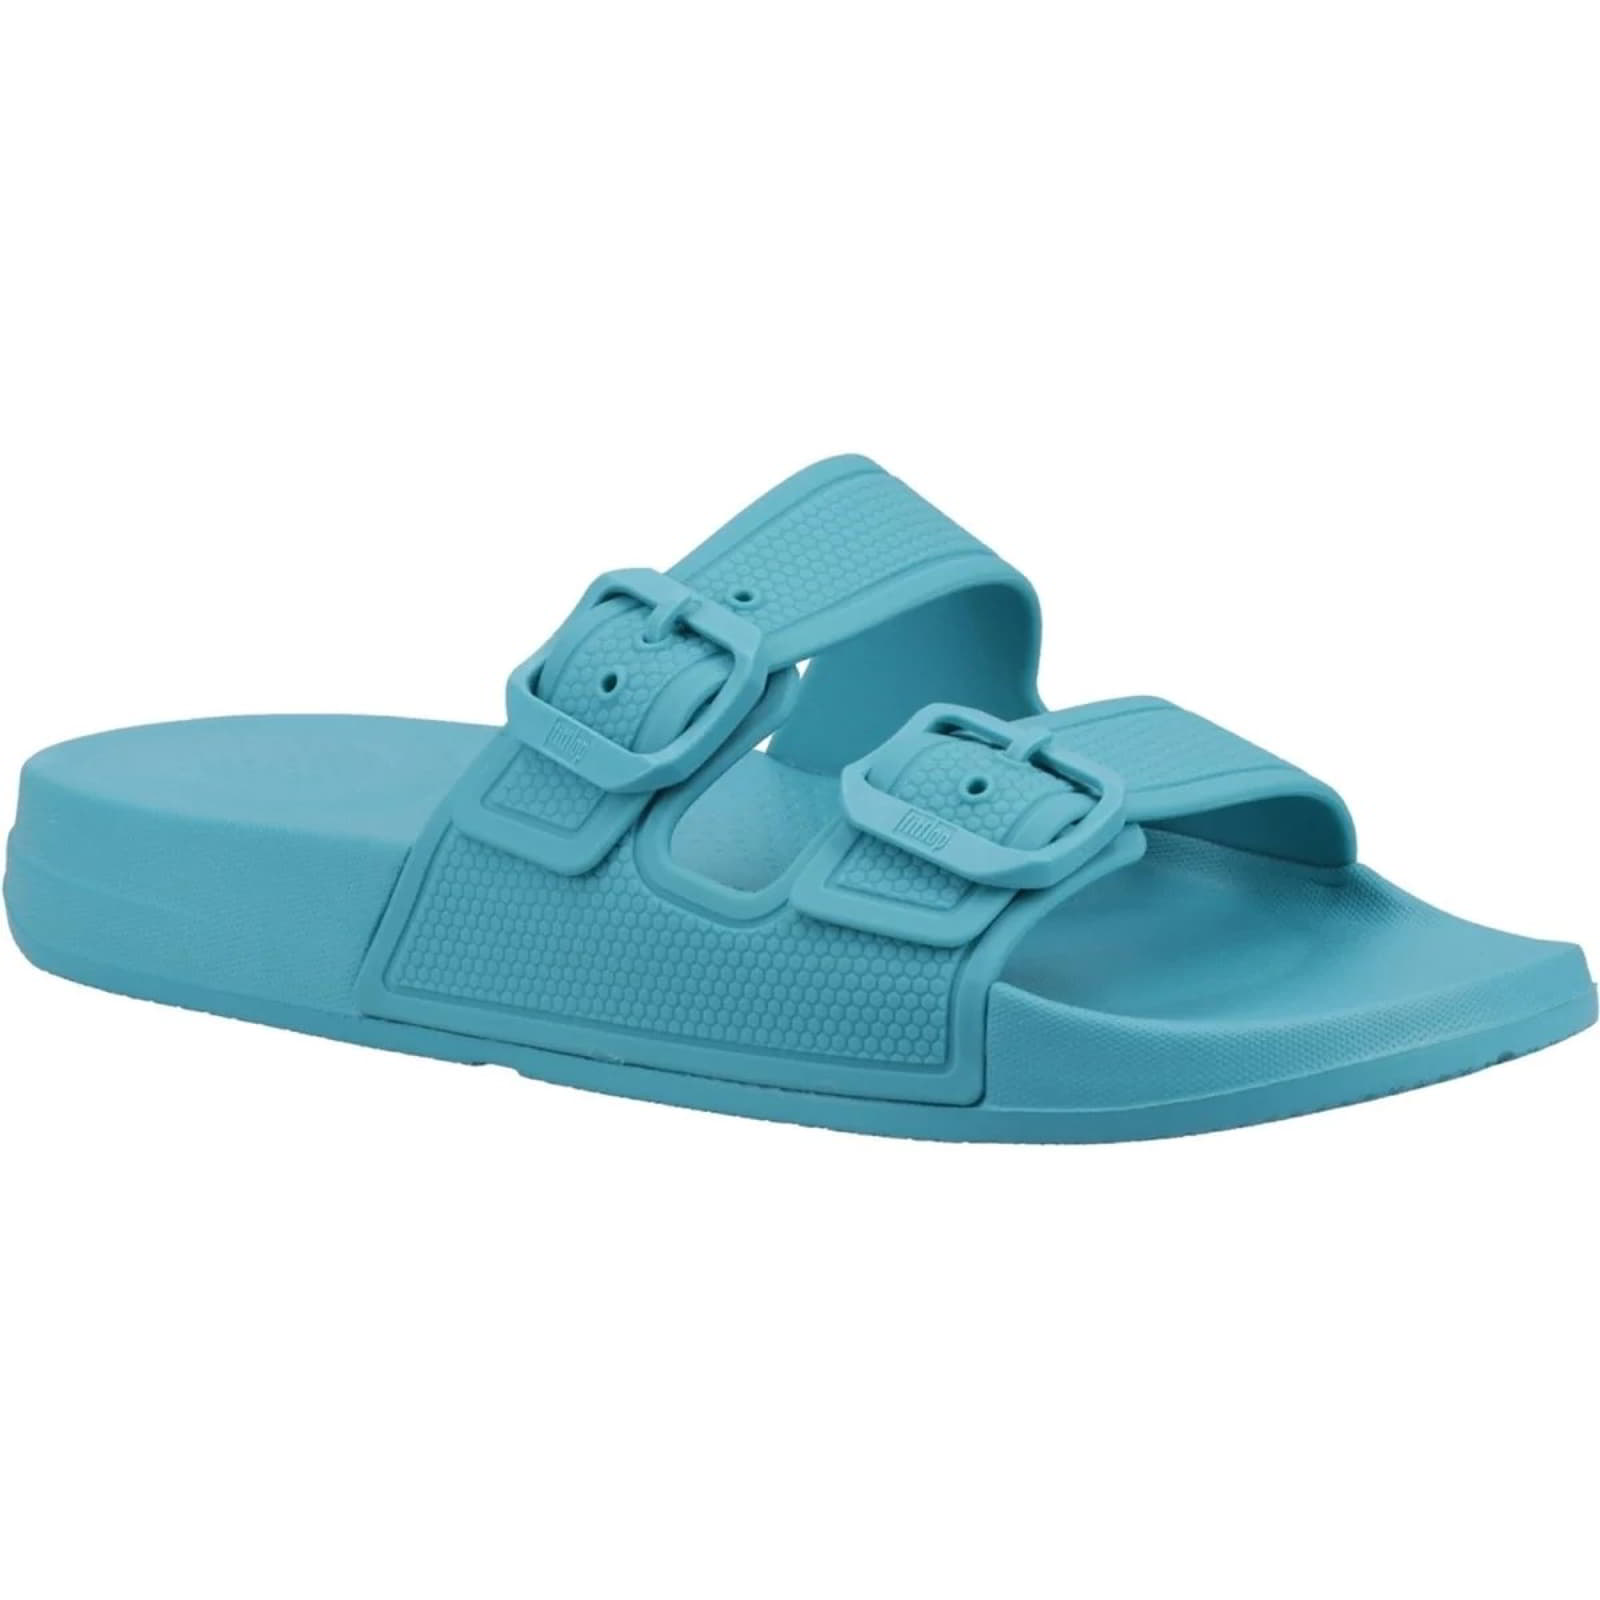 FitFlop Women's Iqushion Pool Slides Sandals - UK 4